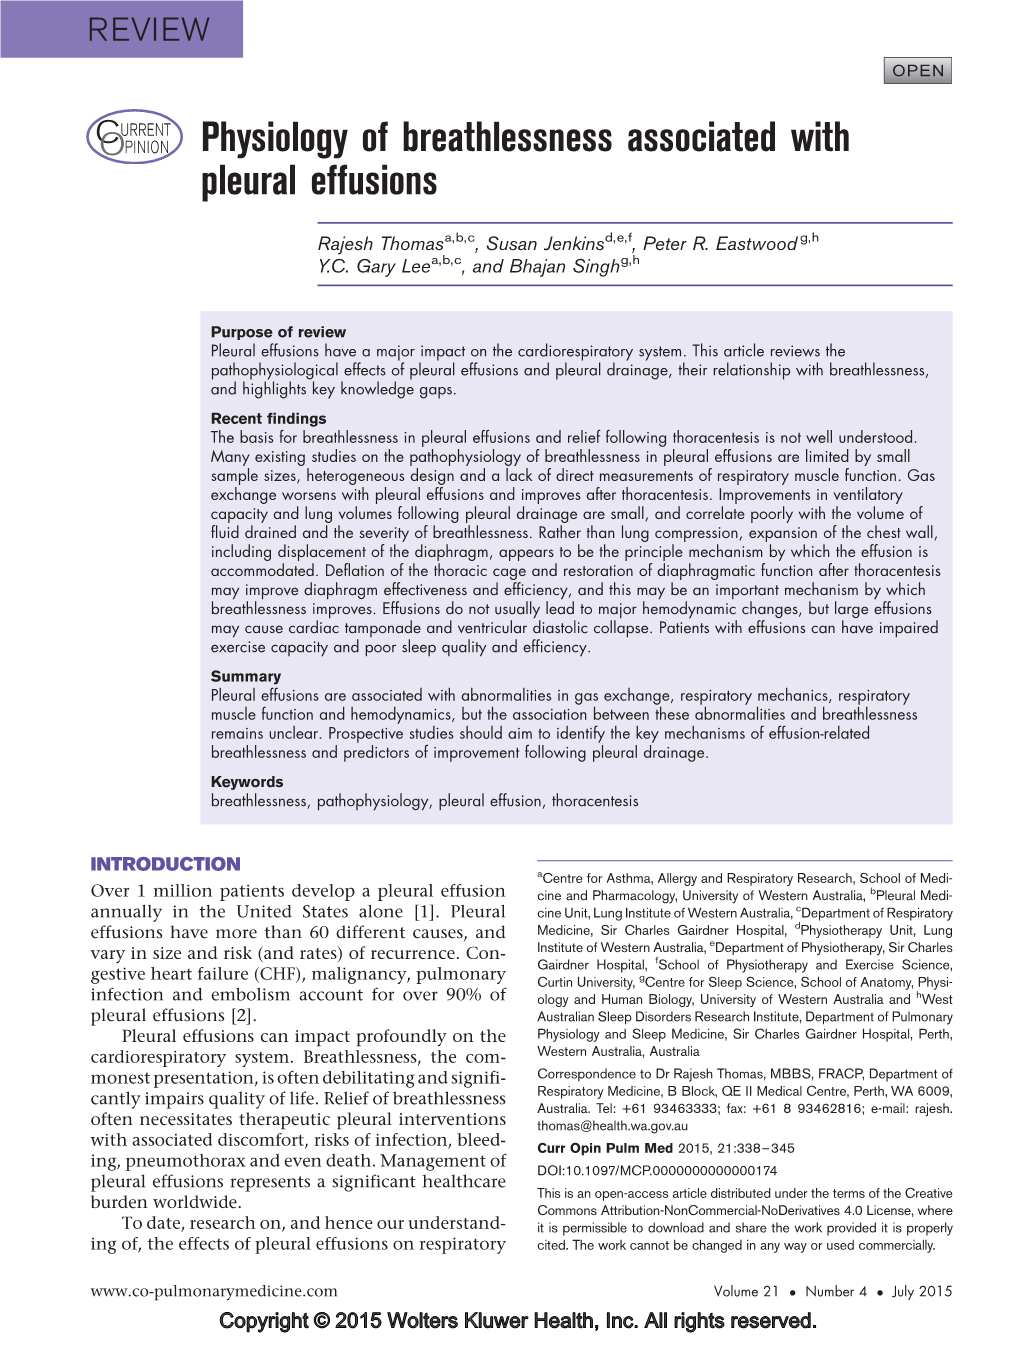 Physiology of Breathlessness Associated with Pleural Effusions